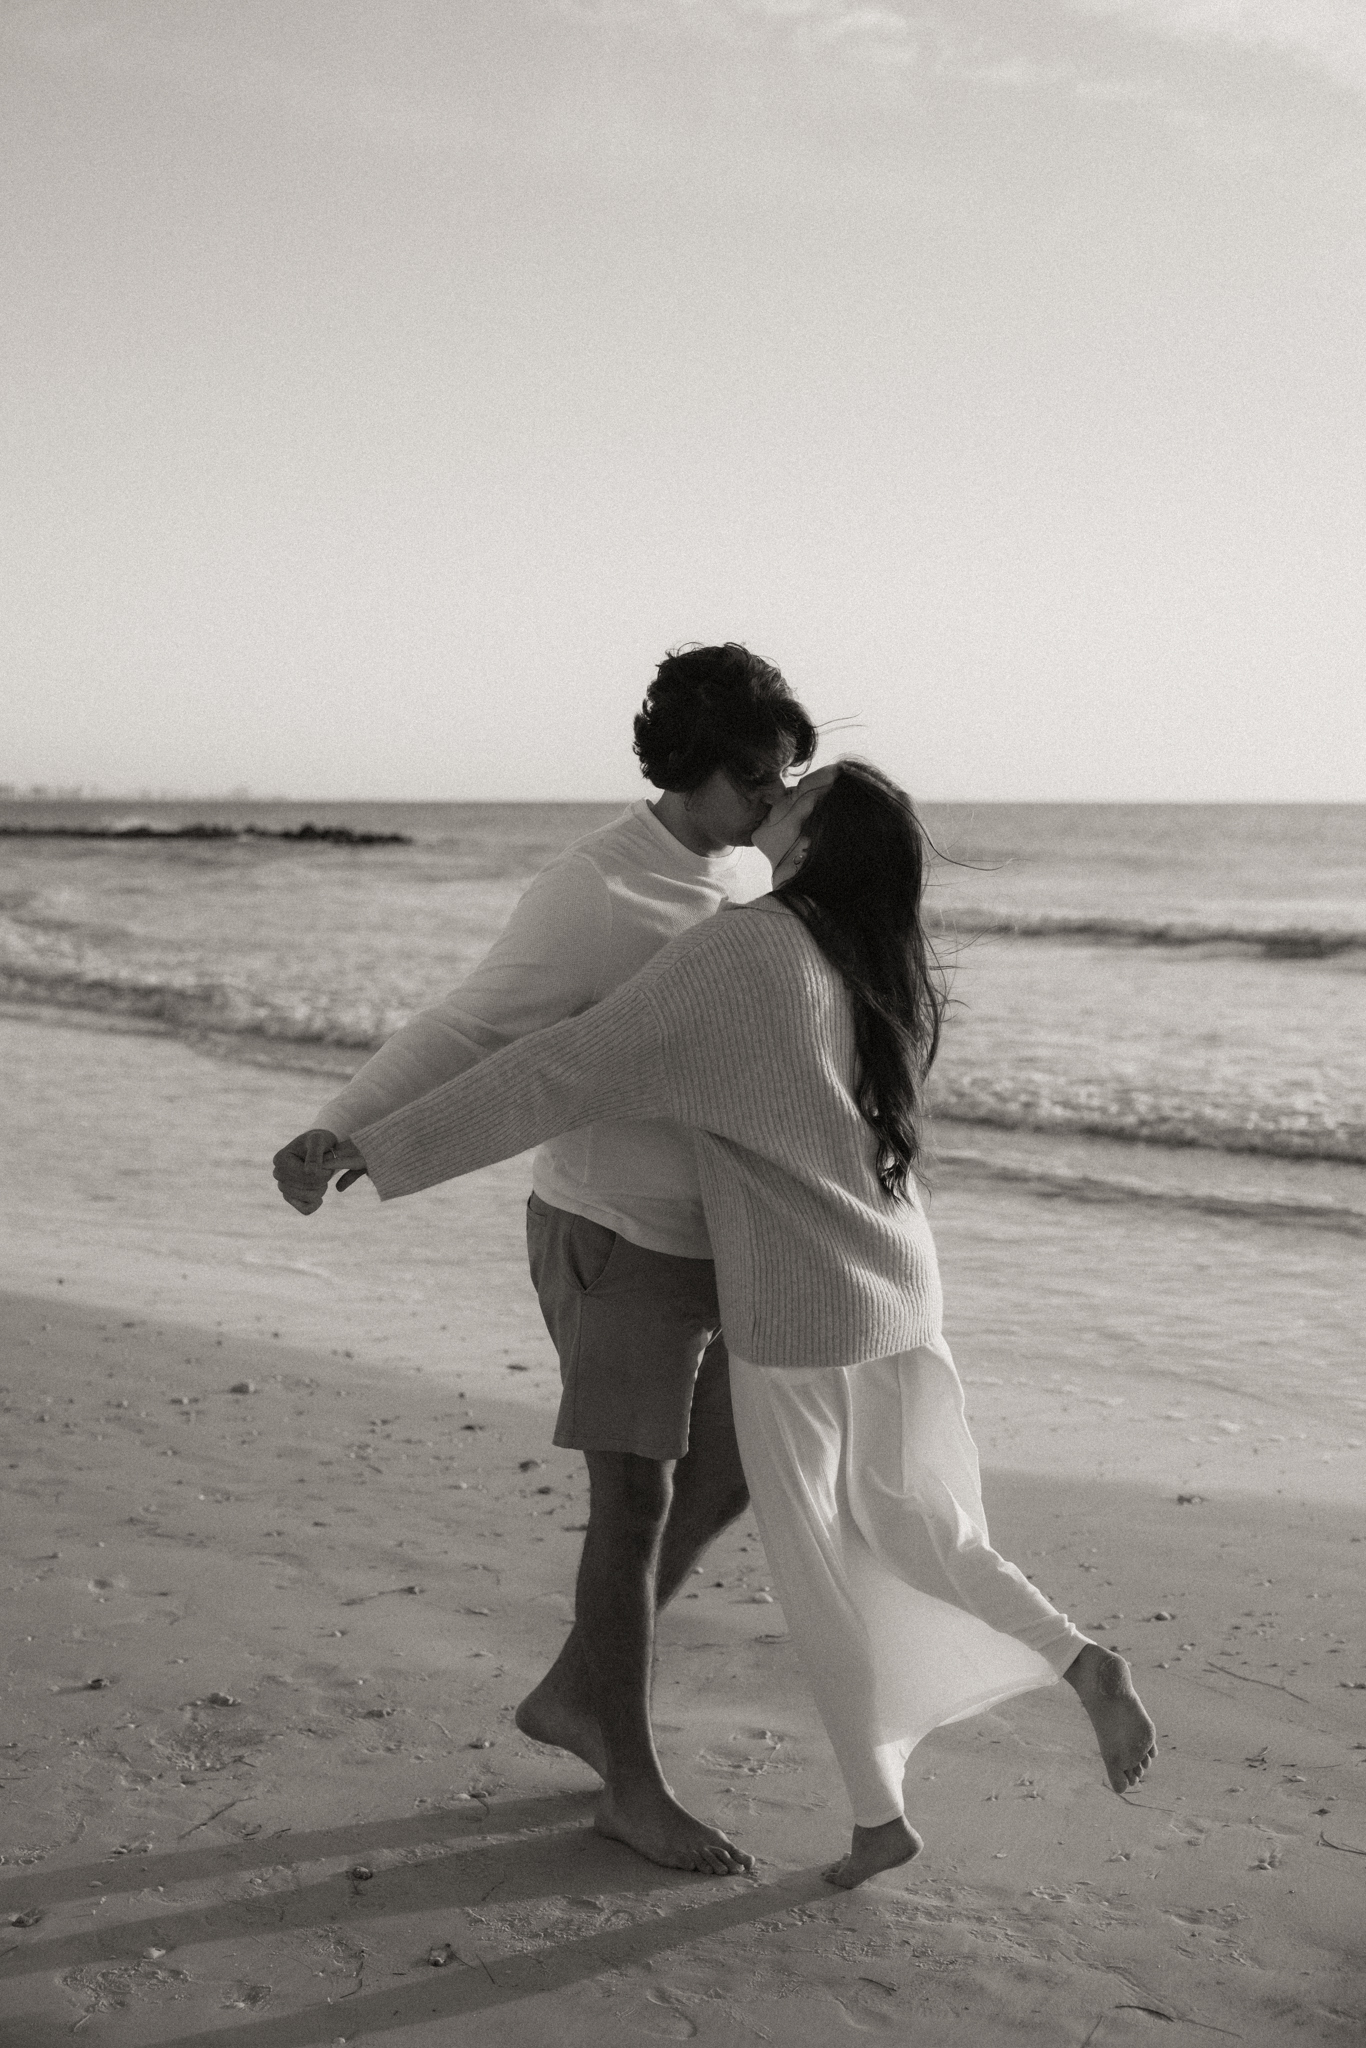 Couple in motion on the beach as they kiss. Black and white.